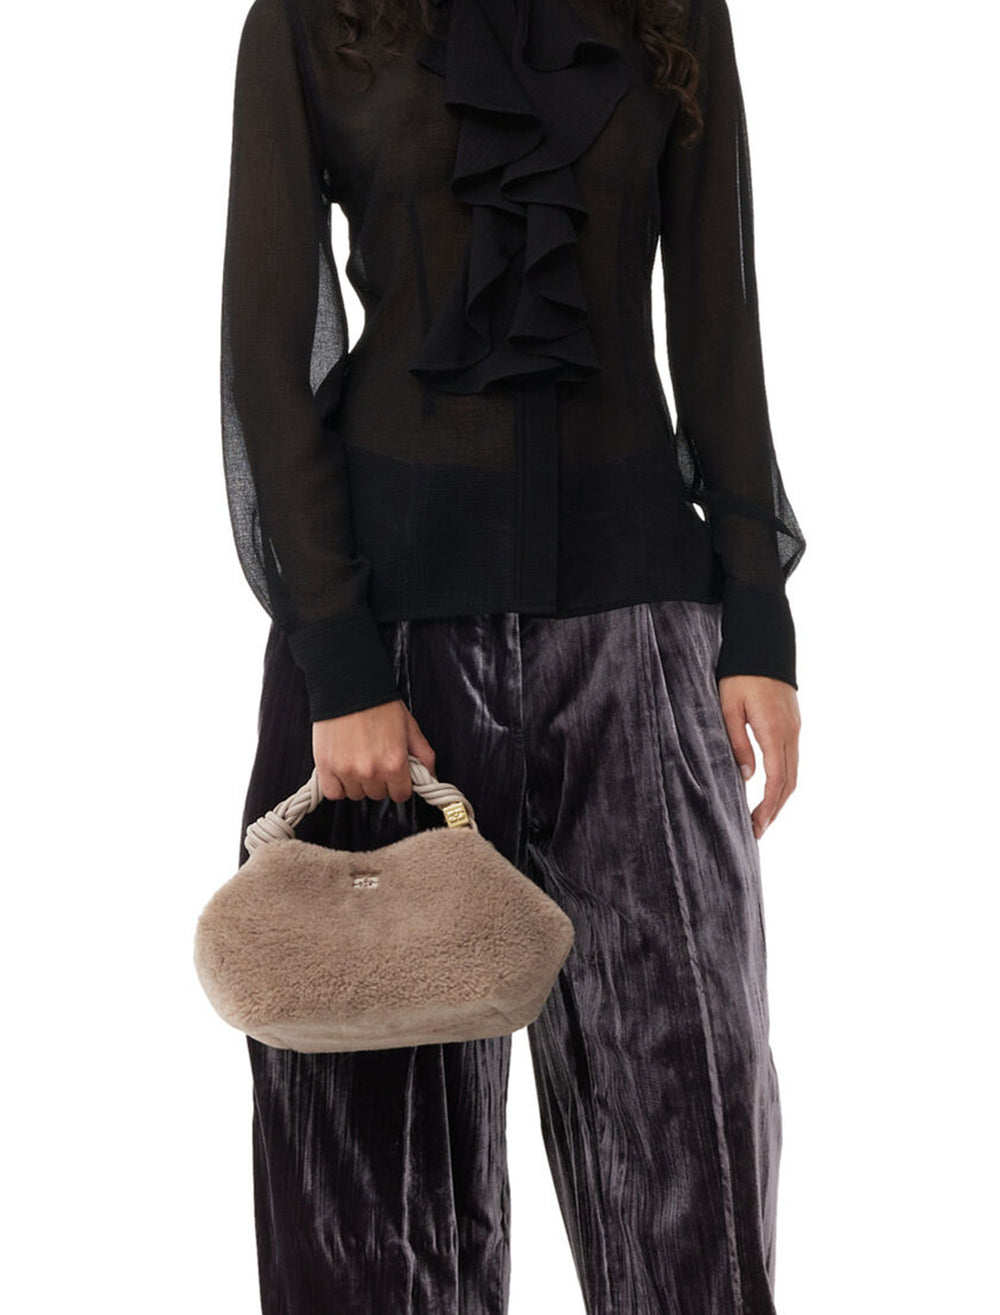 Model holding GANNI's small bou bag in oyster gray fur.